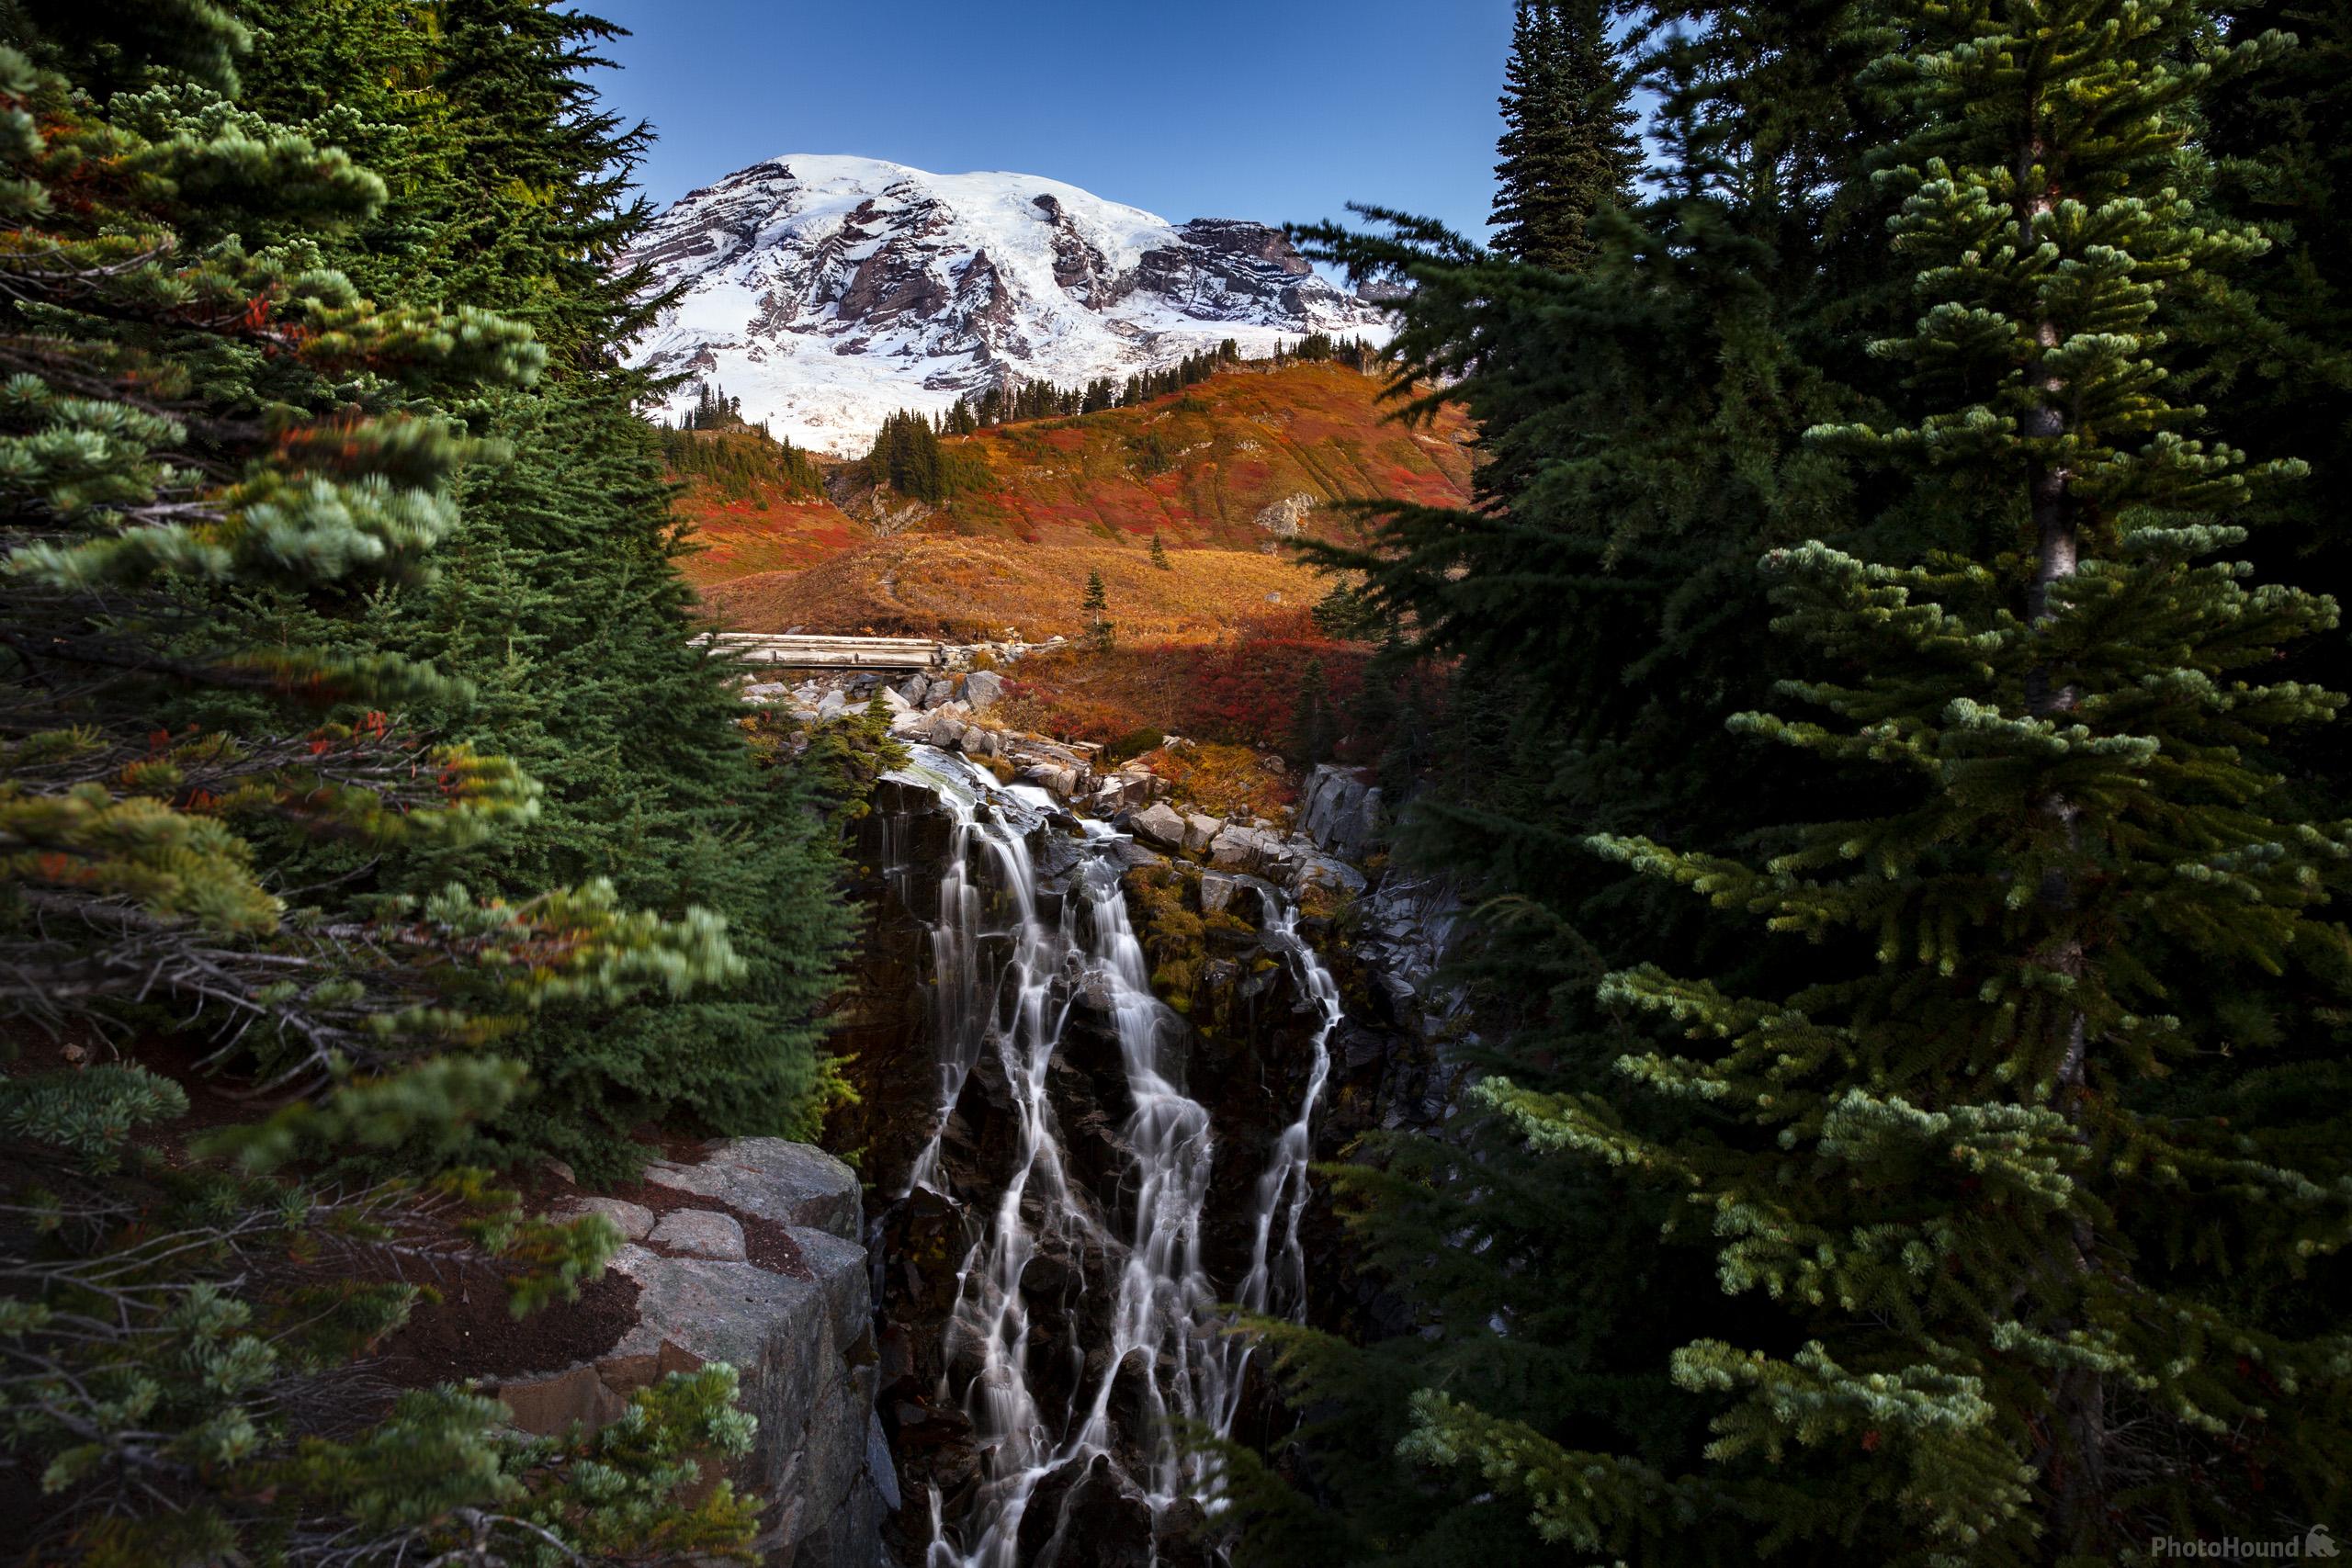 Image of Myrtle Falls, Mount Rainier National Park by T. Kirkendall and V. Spring